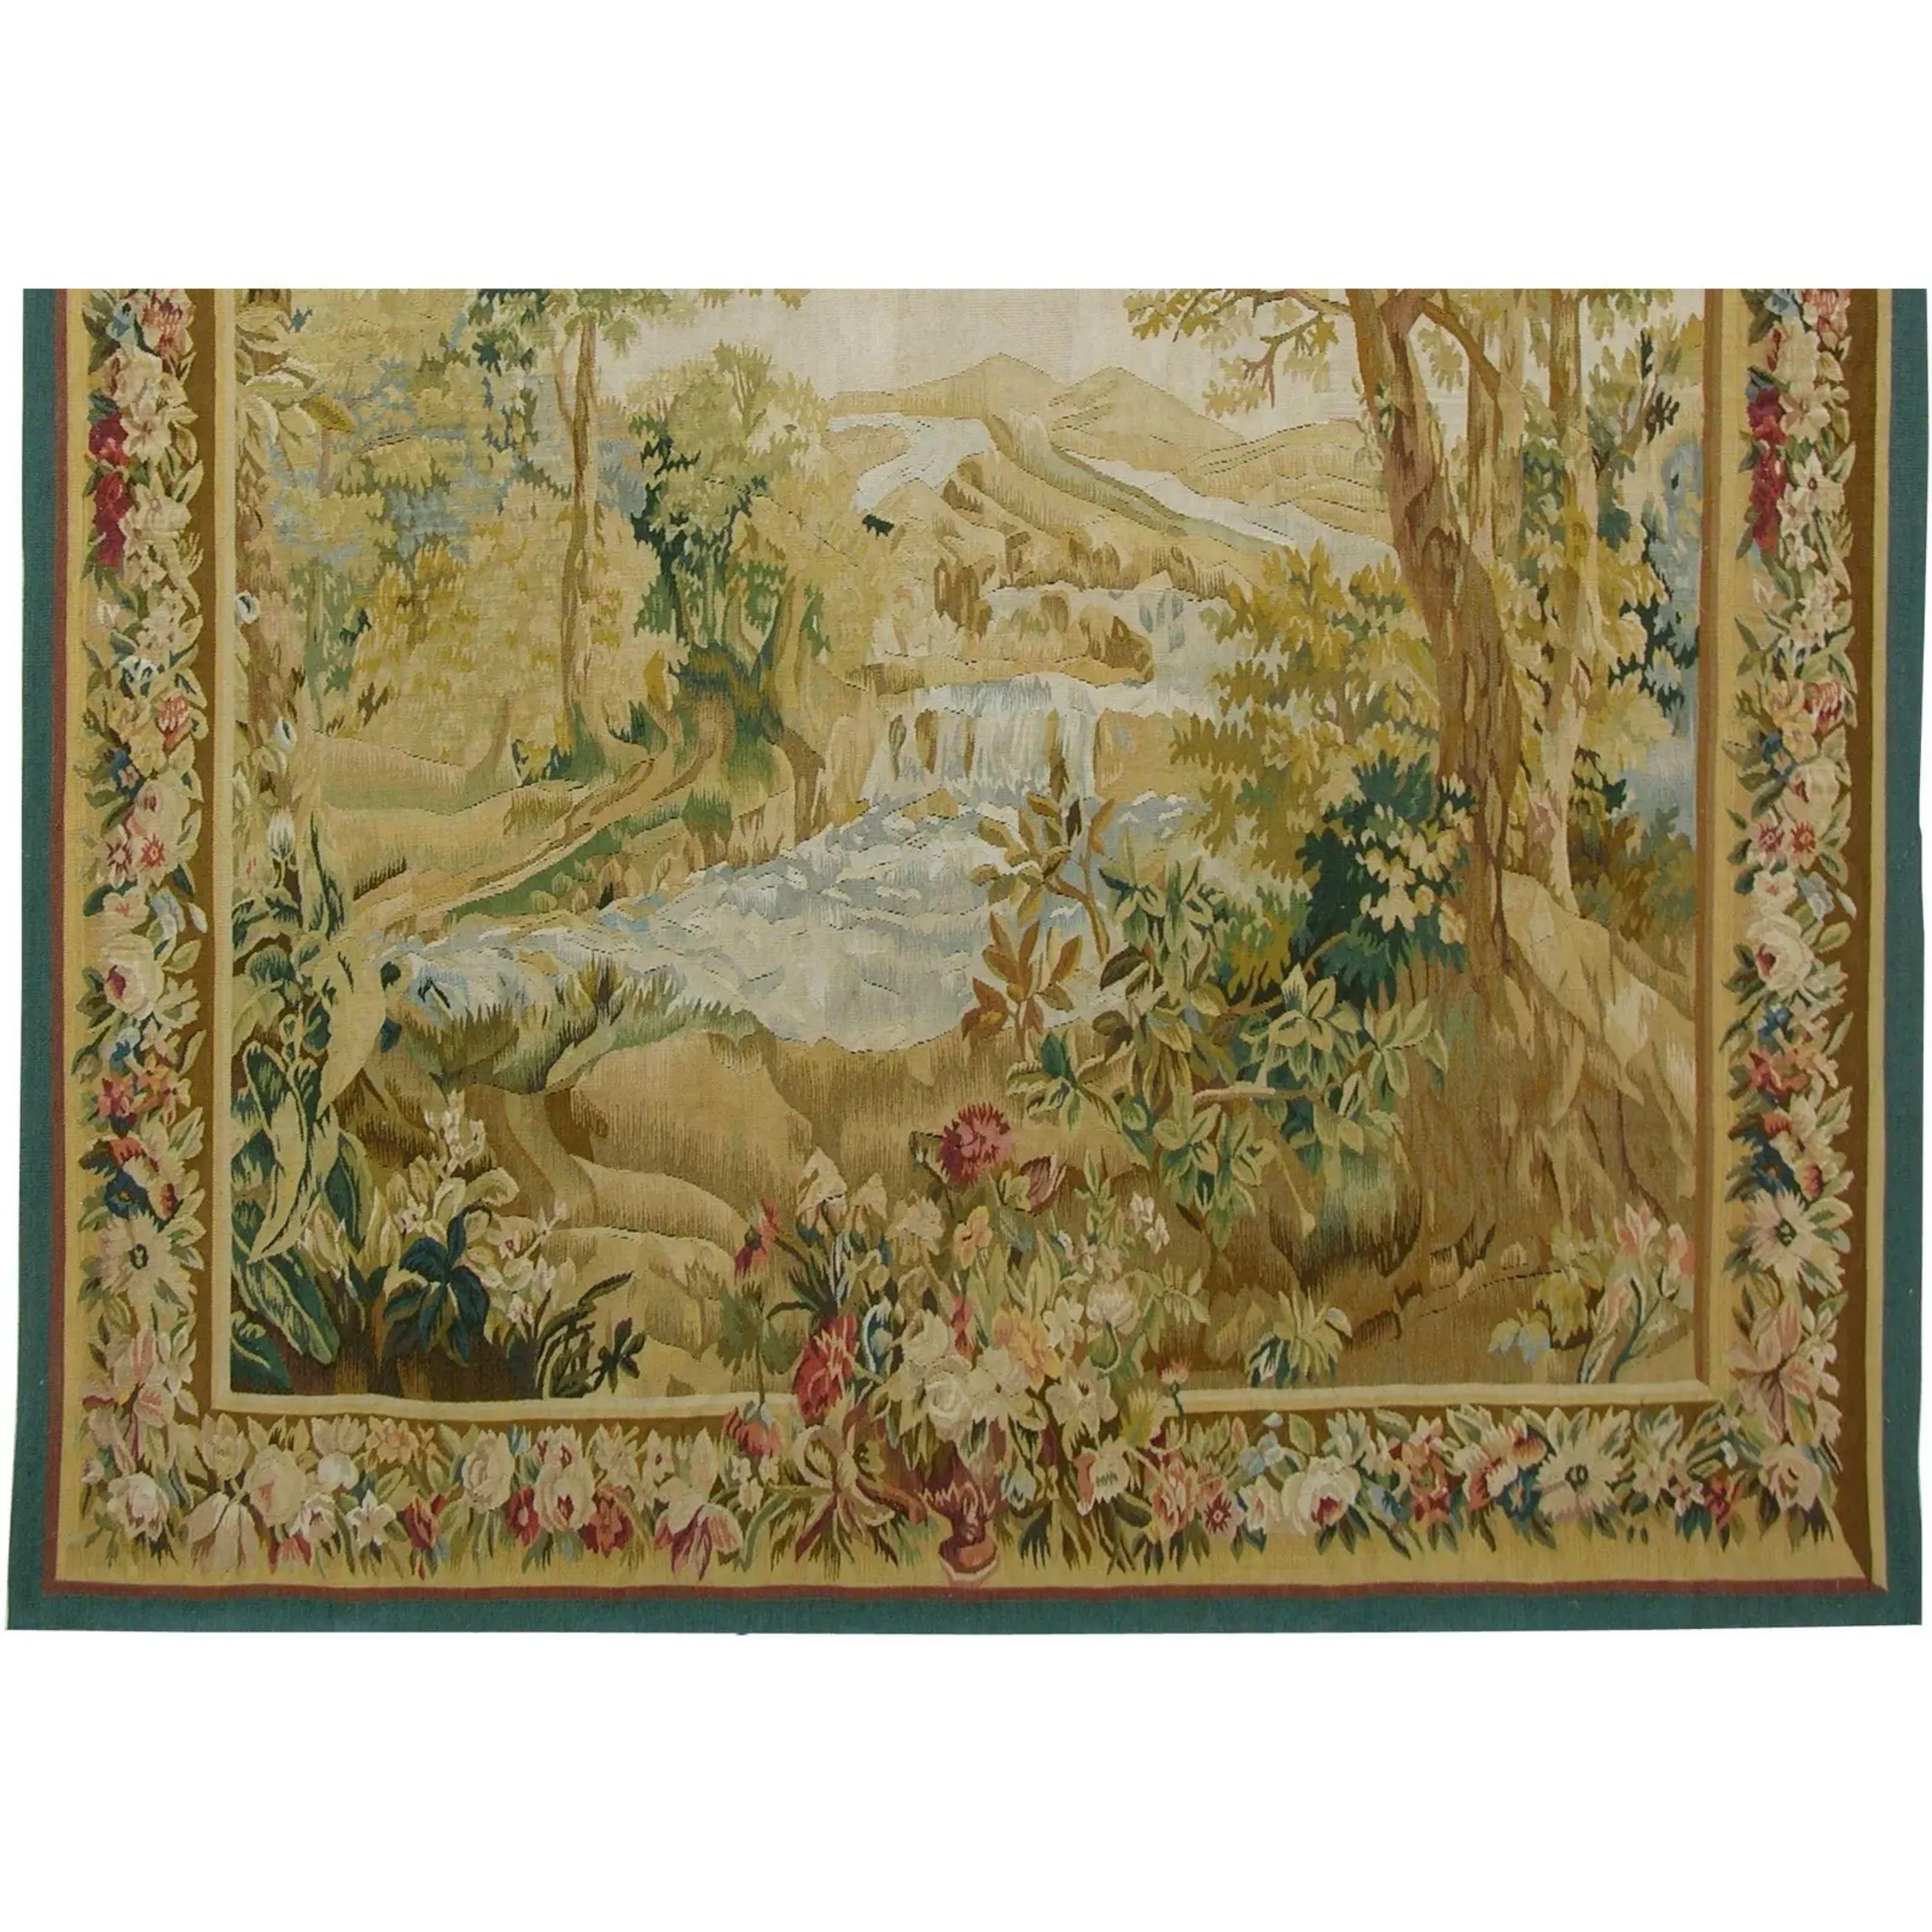 Unknown Vintage Woven Outdoor Scene Tapestry 6.25X5.0 For Sale